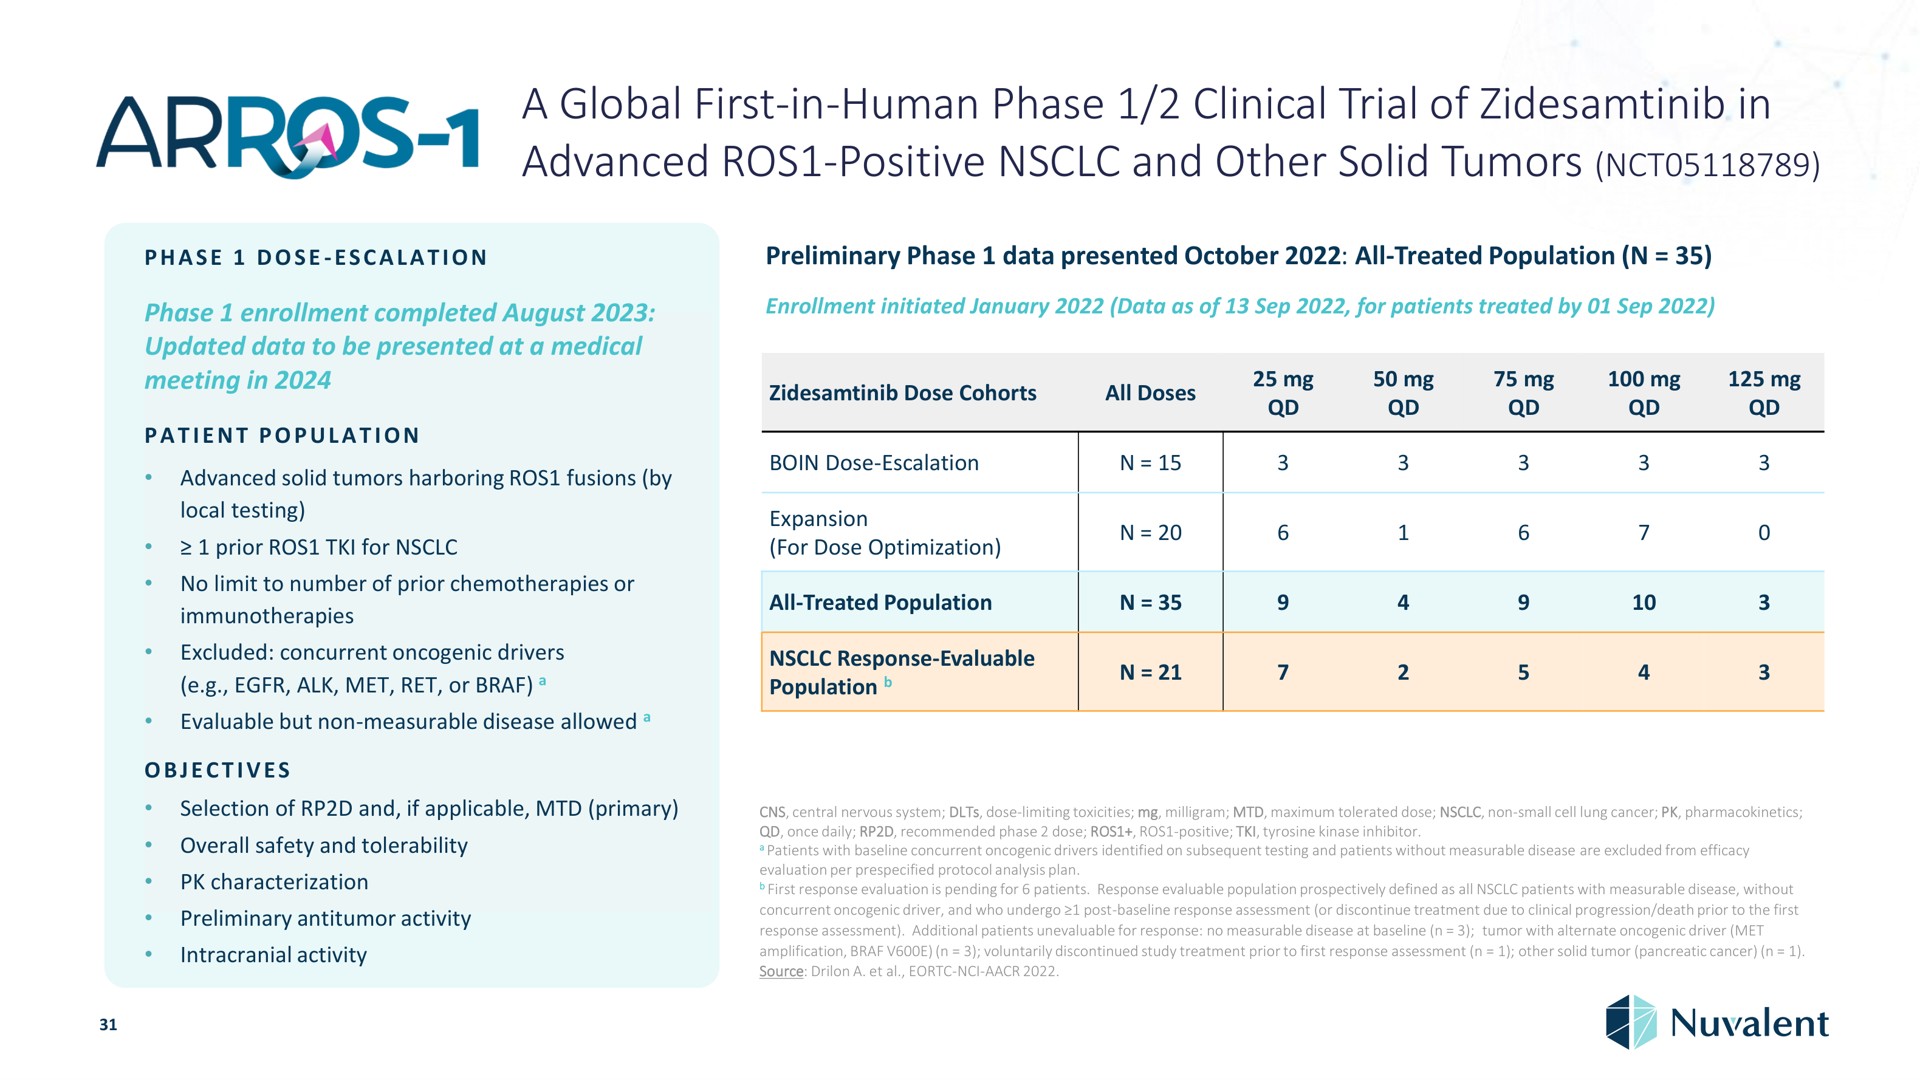 a global first in human phase clinical trial of in advanced positive and other solid tumors dose preliminary data presented all treated population enrollment completed august updated data to be presented at medical meeting patient population harboring fusions by local testing prior for no limit to number prior chemotherapies or excluded concurrent drivers alk met ret or evaluable but non measurable disease allowed objectives enrollment initiated data as for patients treated by dose cohorts all doses dose expansion for dose optimization all treated population response evaluable population selection if applicable primary overall safety tolerability characterization preliminary activity intracranial activity central nervous system dose toxicities milligram maximum tolerated dose non small cell lung cancer once daily recommended with concurrent evaluation per protocol an patients drivers identified on plan tyrosine kinase testing patients without measurable disease are excluded from efficacy first response evaluation is pending patients response evaluable population prospect defined as all patients with measurable disease without concurrent driver who post response assessment treatment due progression death prior to the first response additional patients for no measurable tumor with alternate driver met amplification discontinued study treatment prior to first response assessment tumor pancreatic cancer source | Nuvalent